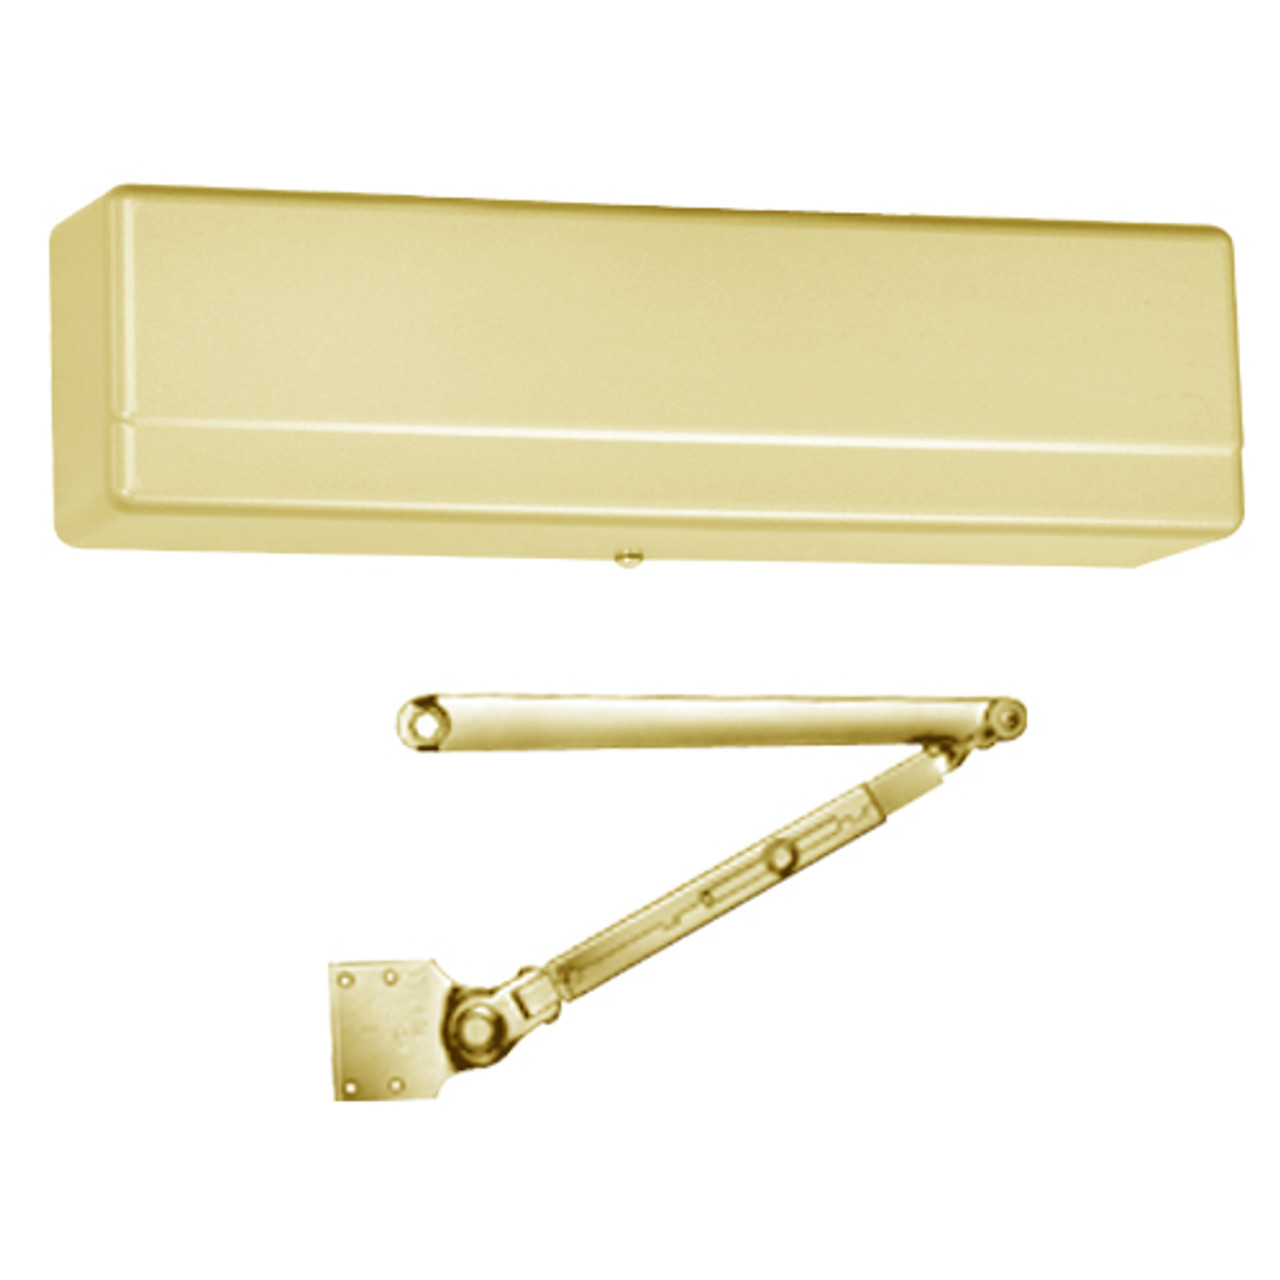 1431-H8-EAB-RH Sargent 1431 Series Powerglide Door Closer with H8 - Mortise Foot Hold Open Arm in Brass Powder Coat